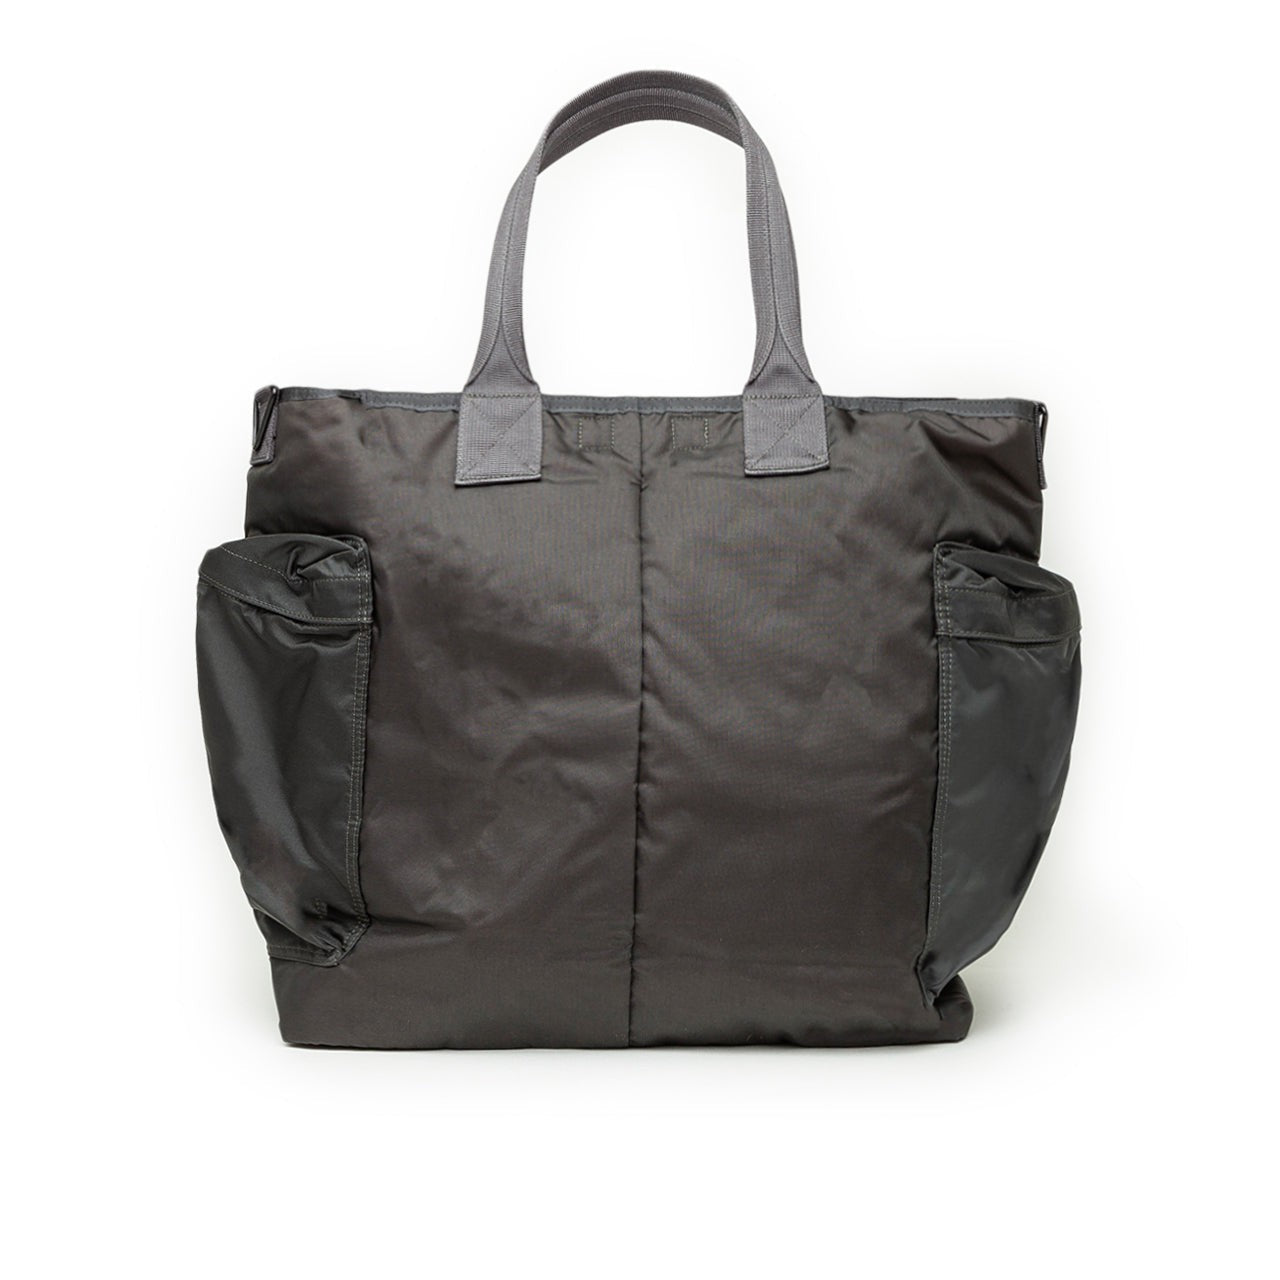 PORTER FORCE GRAY Ver. 2WAY TOTE BAG - トートバッグ